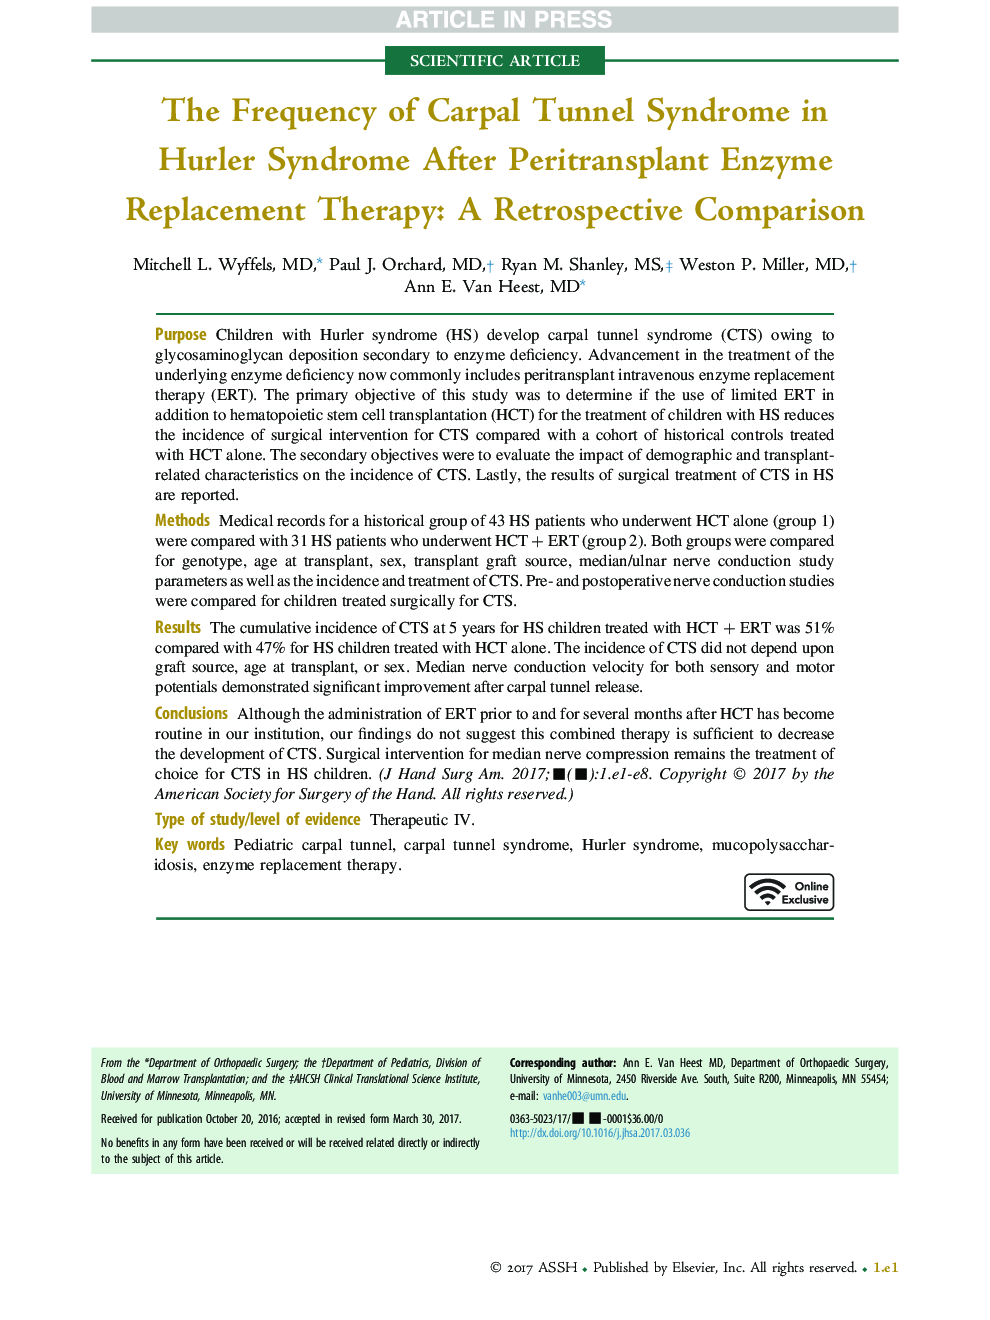 The Frequency of Carpal Tunnel Syndrome in Hurler Syndrome After Peritransplant Enzyme Replacement Therapy: A Retrospective Comparison